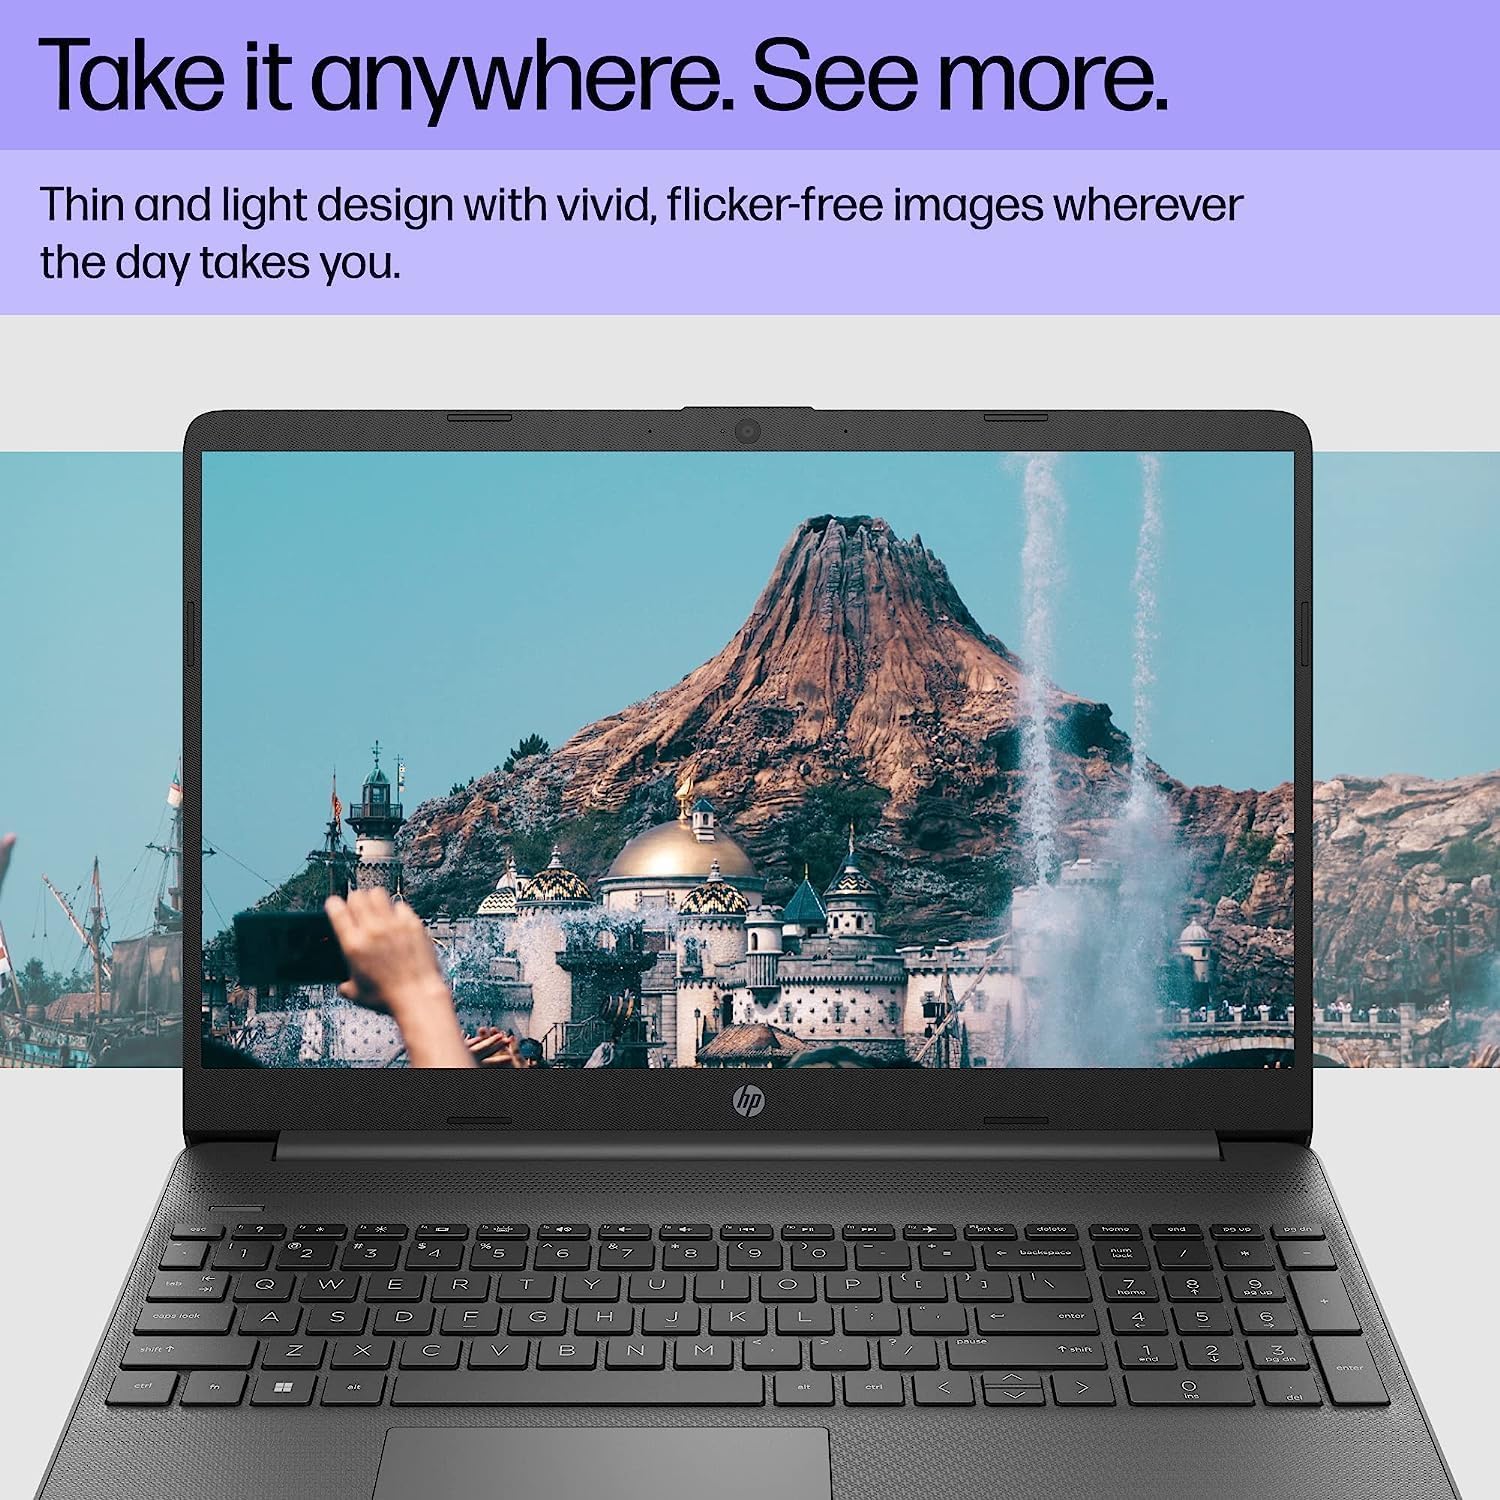 HP Newest Flagship 15.6 HD IPS Laptop for Business, Quad-Core i7-1165G7(Up to 4.7GHz), 32GB RAM, 1TB PCIe SSD, Iris Xe Graphics, NumPad, Webcam, HDMI, WiFi, Bluetooth, Windows 11, GM Accessories